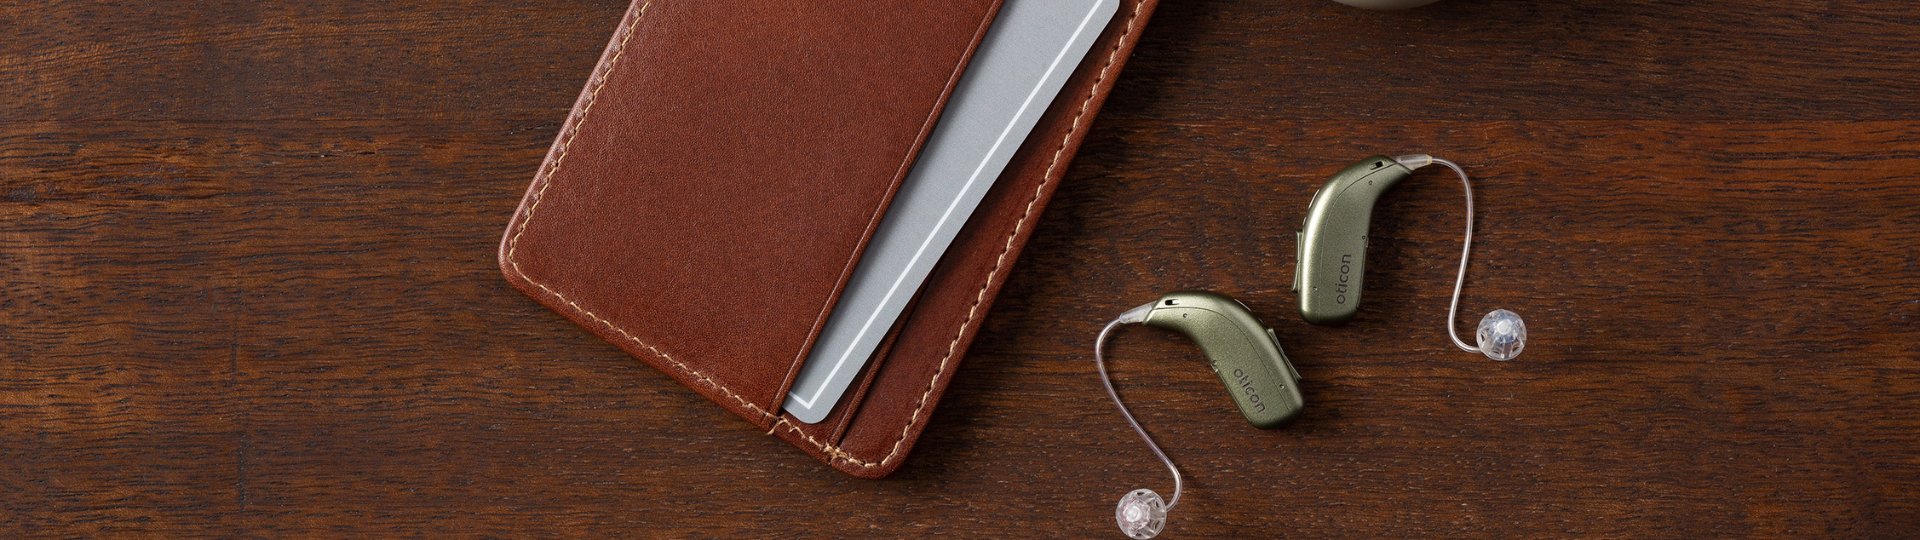 a pair of hearing aids with a wallet on a dark wood background